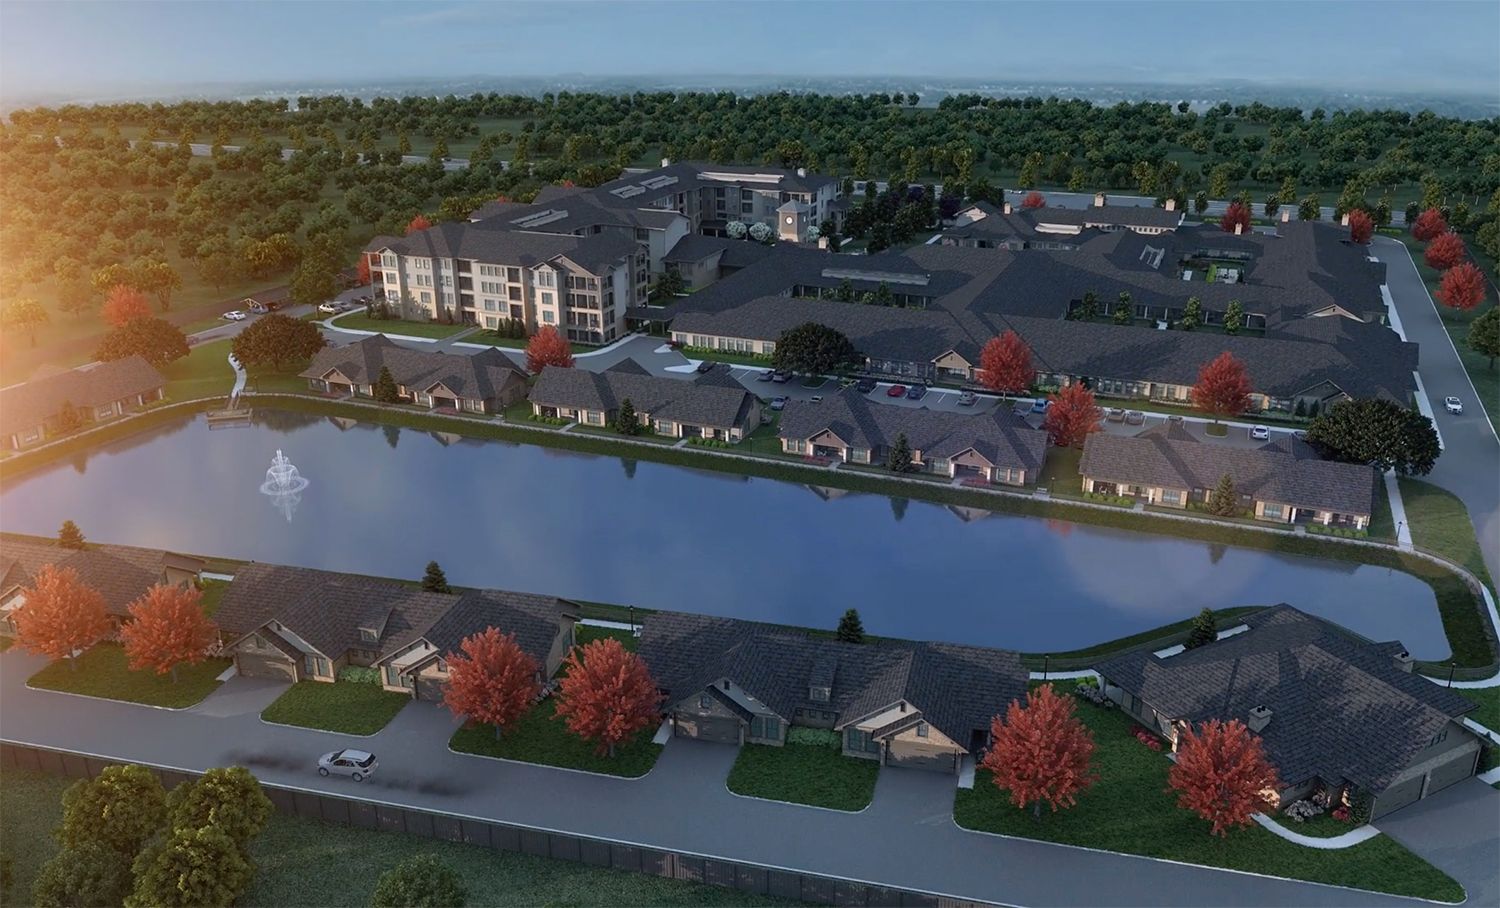 Aerial view of The Lodge at Pine Creek senior living community, showcasing its architecture and outdoor surroundings.